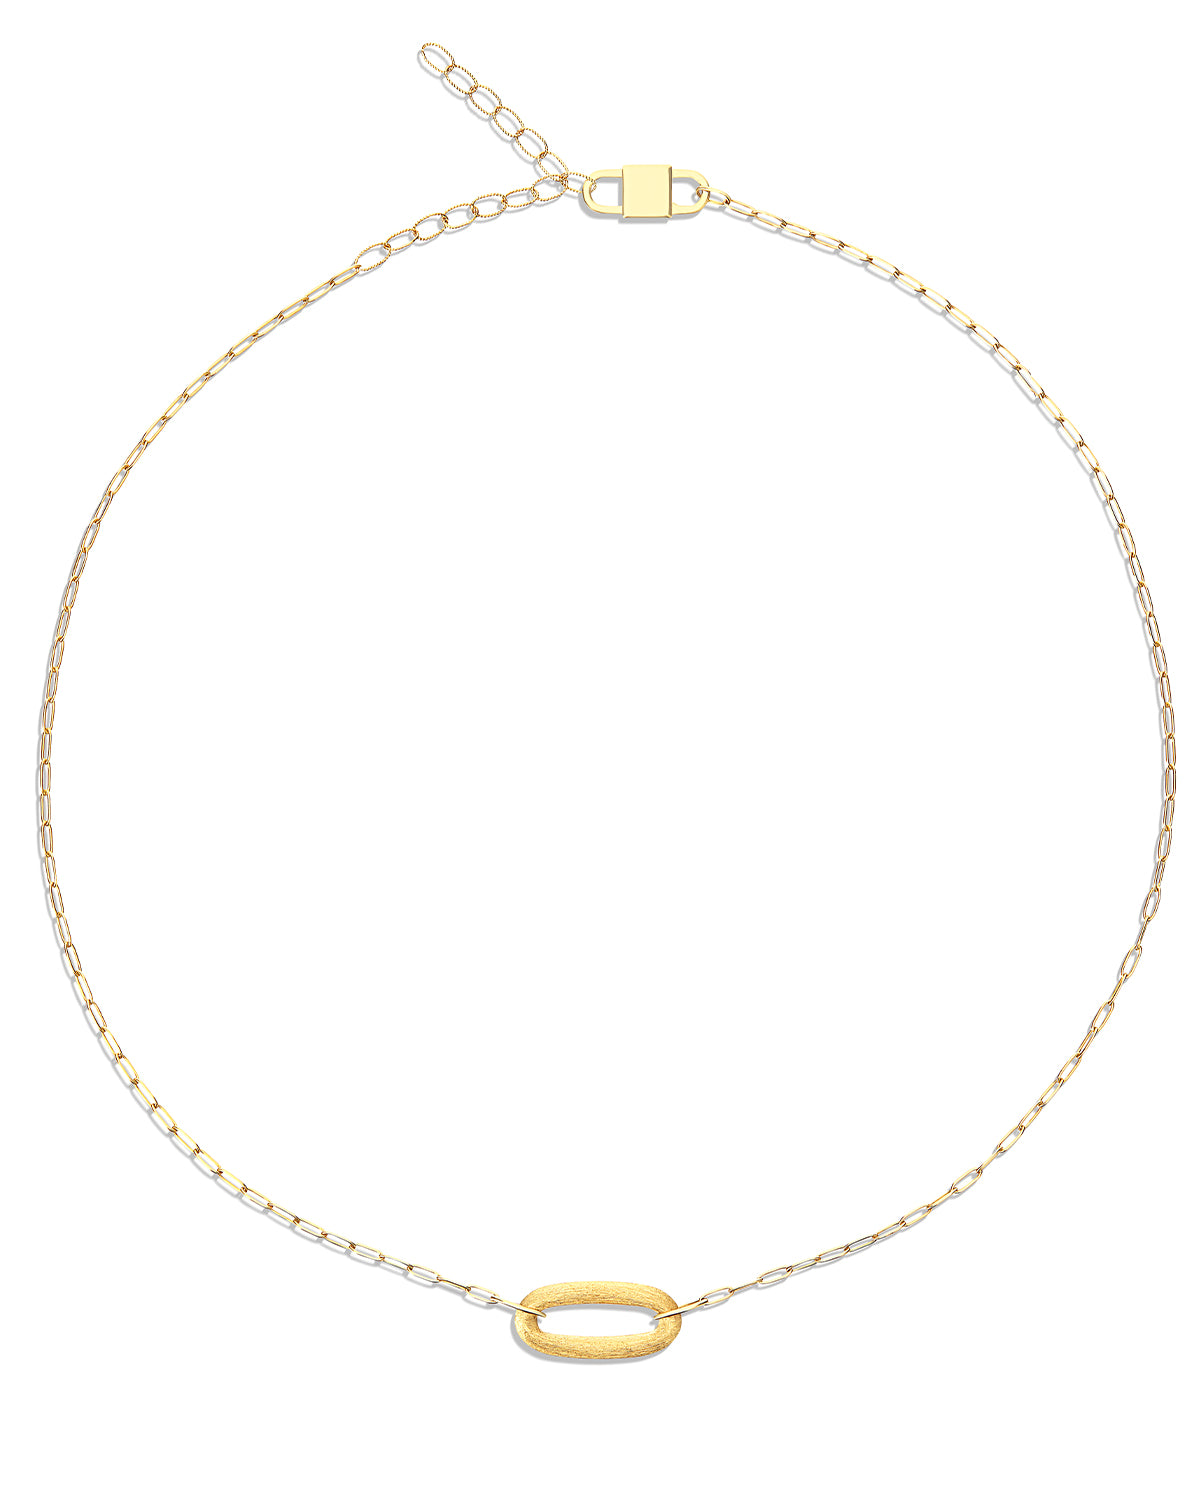 LIBERA GOLD oval ring necklace